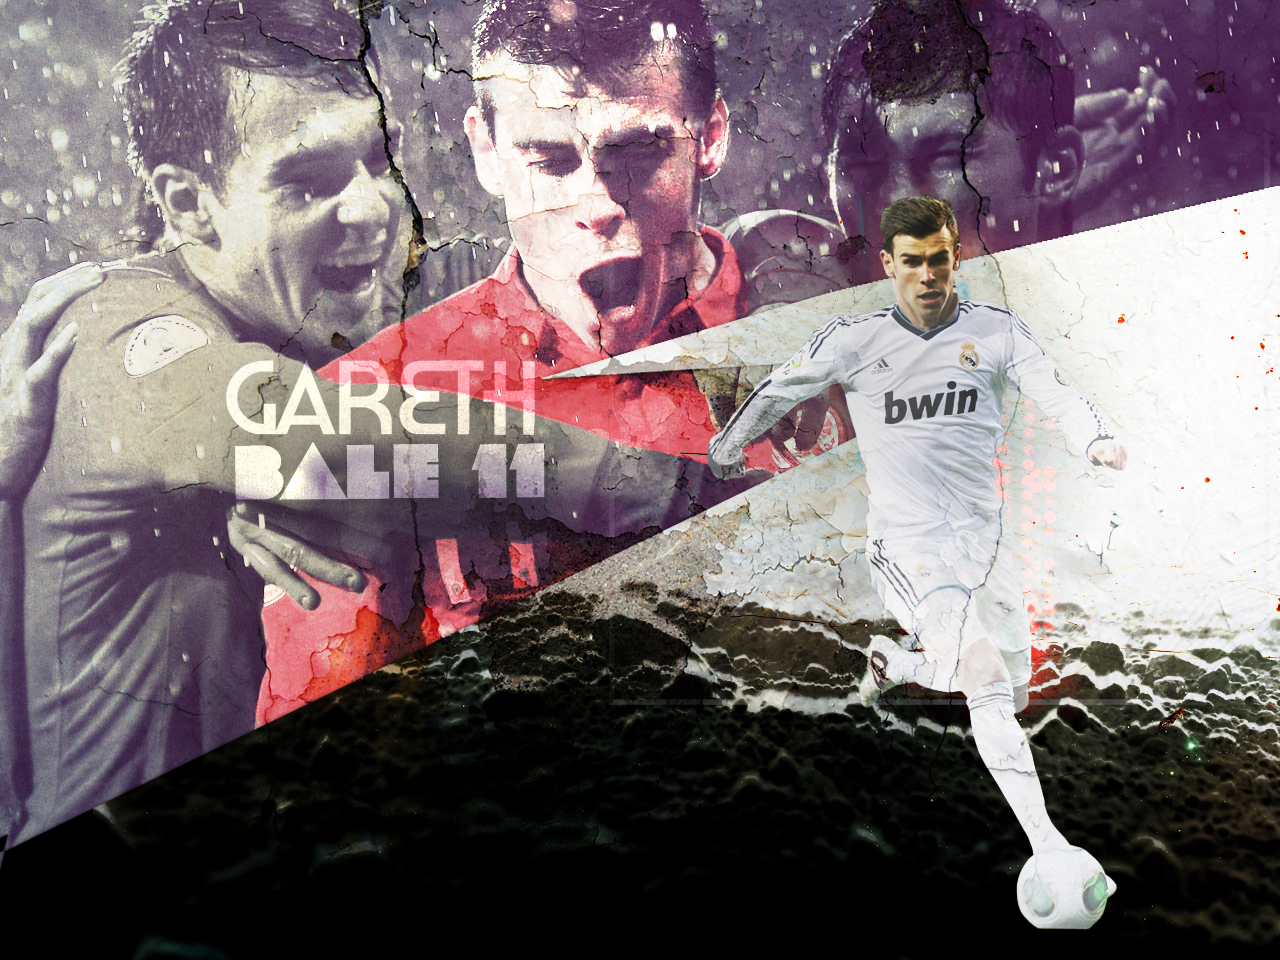 Gareth Bale Real Madrid 2013 Wallpaper HD Widescreen For PC Computer